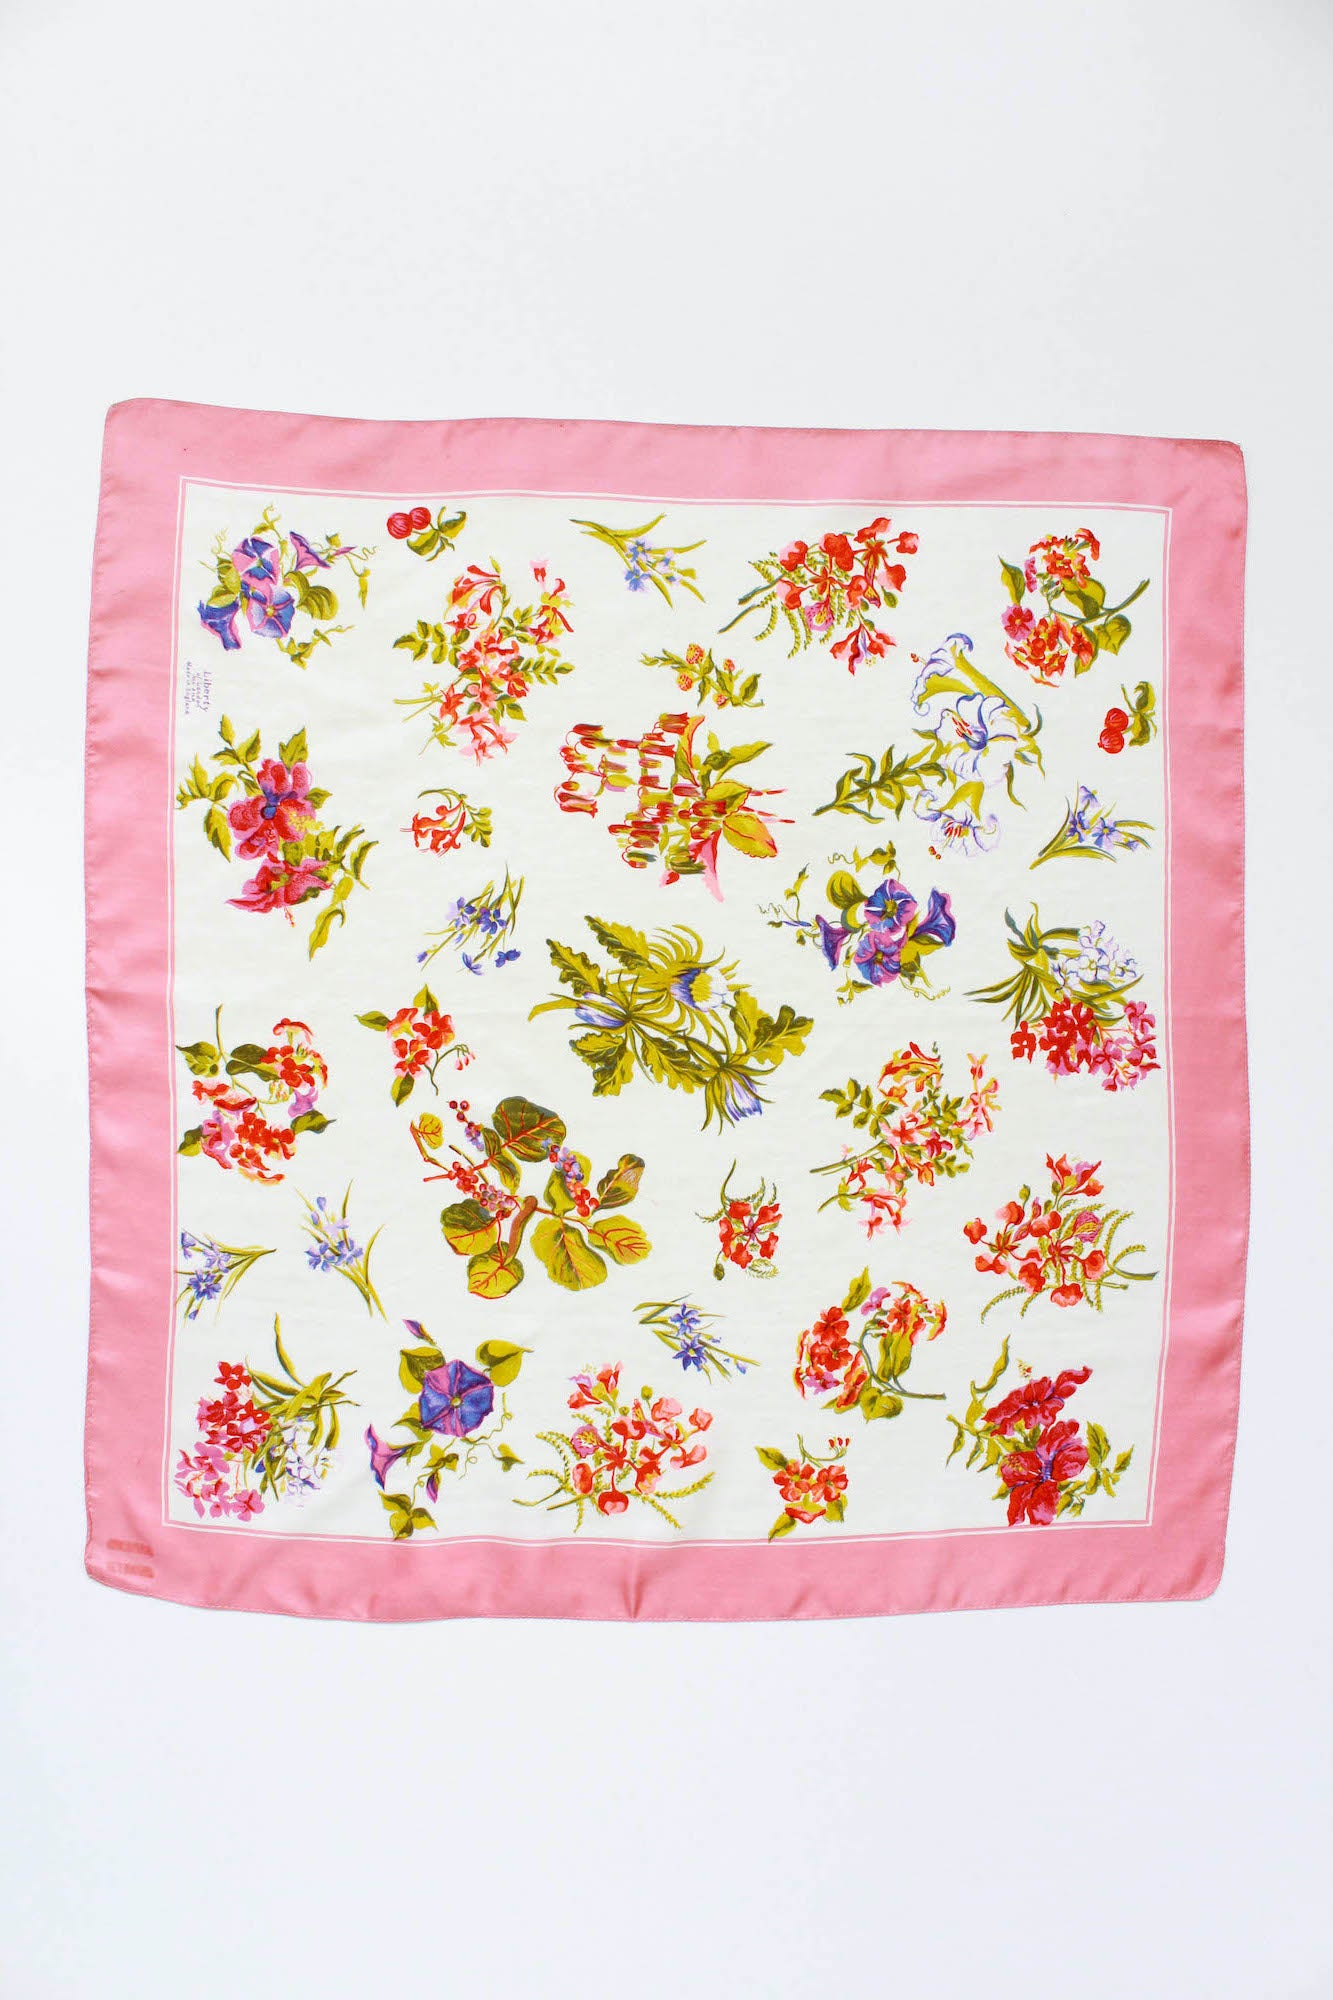 vintage liberty of london floral print silk scarf, cream with pink border and green/red/purple flowers